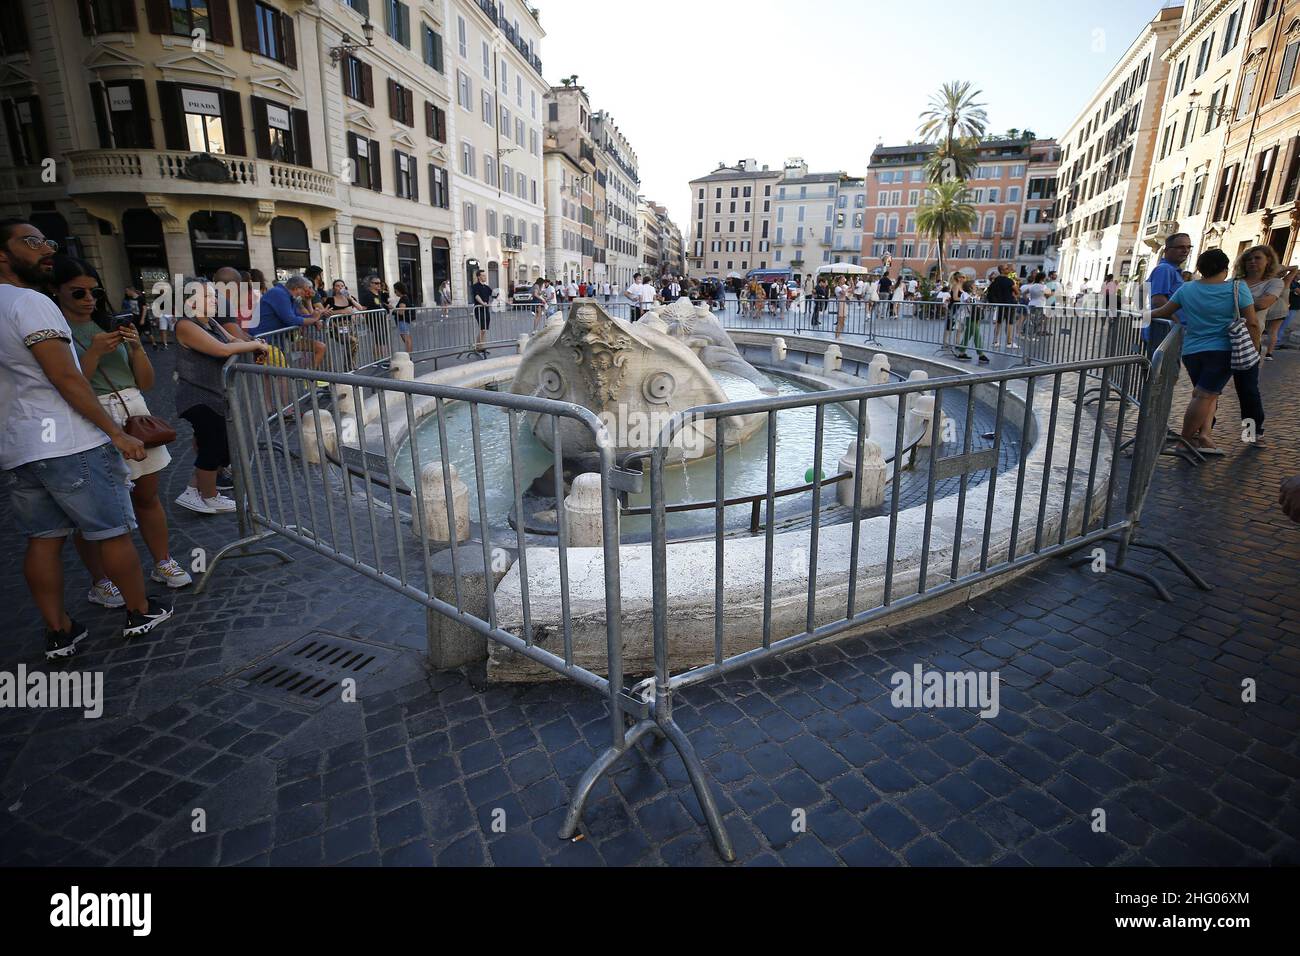 Cecilia Fabiano/ LaPresse July 02 , 2021 Roma (Italy) News Barcaccia Fountain protected by barriers during the UEFA EURO 2020 In the Pic : tourists around the fountain Stock Photo